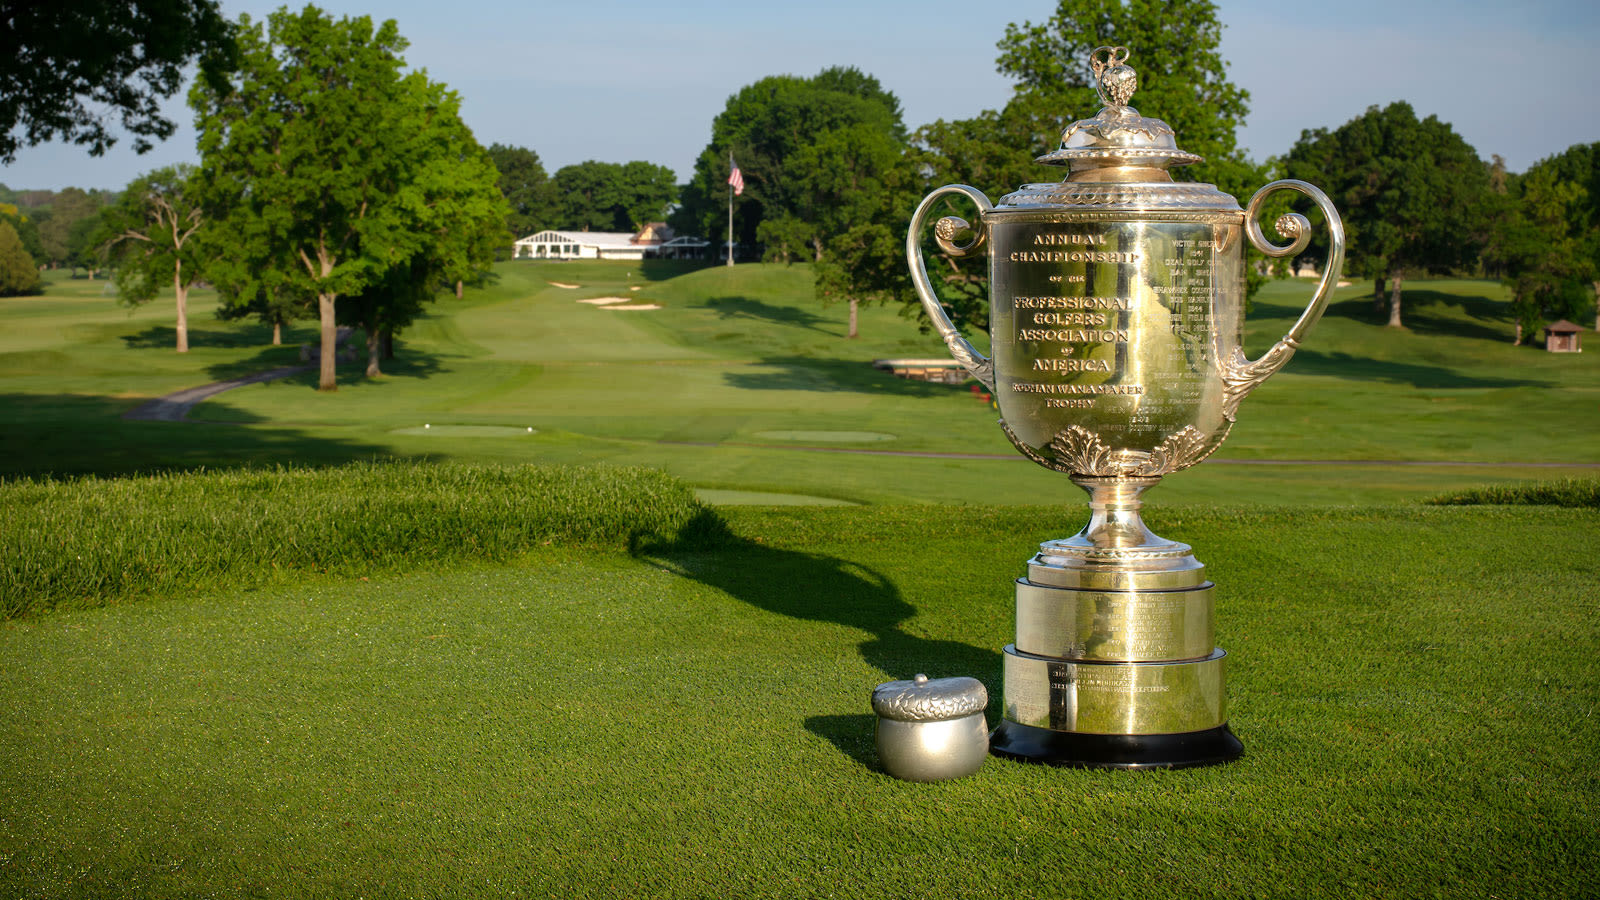 The Wanamaker Trophy at Oak Hill Country Club.